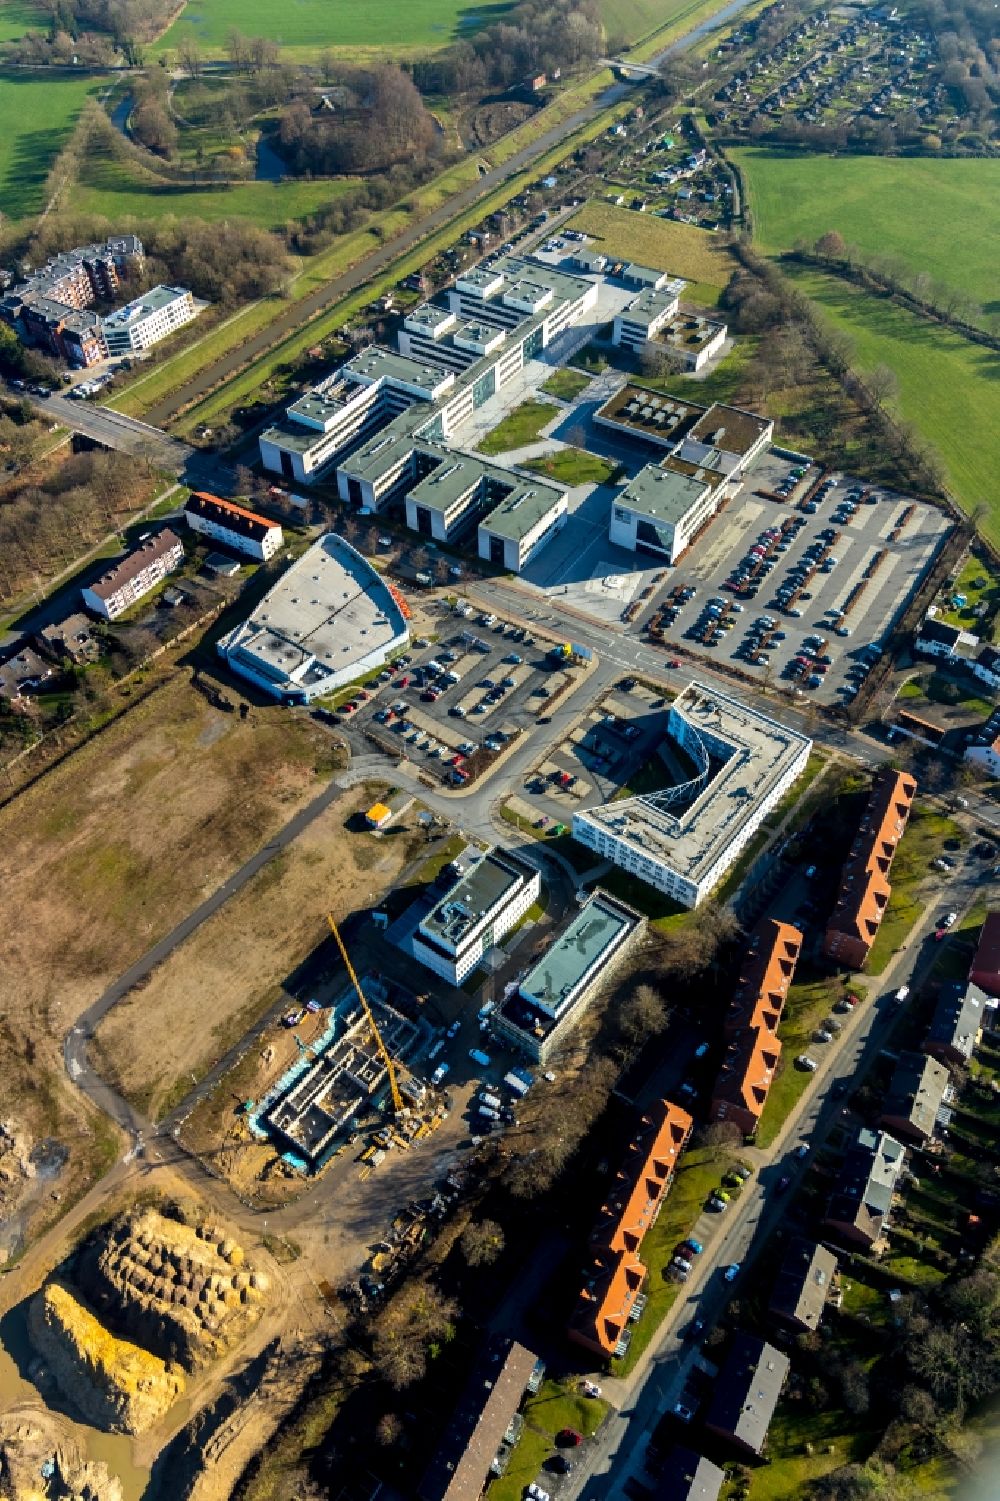 Aerial image Hamm - Construction sites for the new residential area of a multi-family housing estate in Hamm in the state of North Rhine-Westphalia